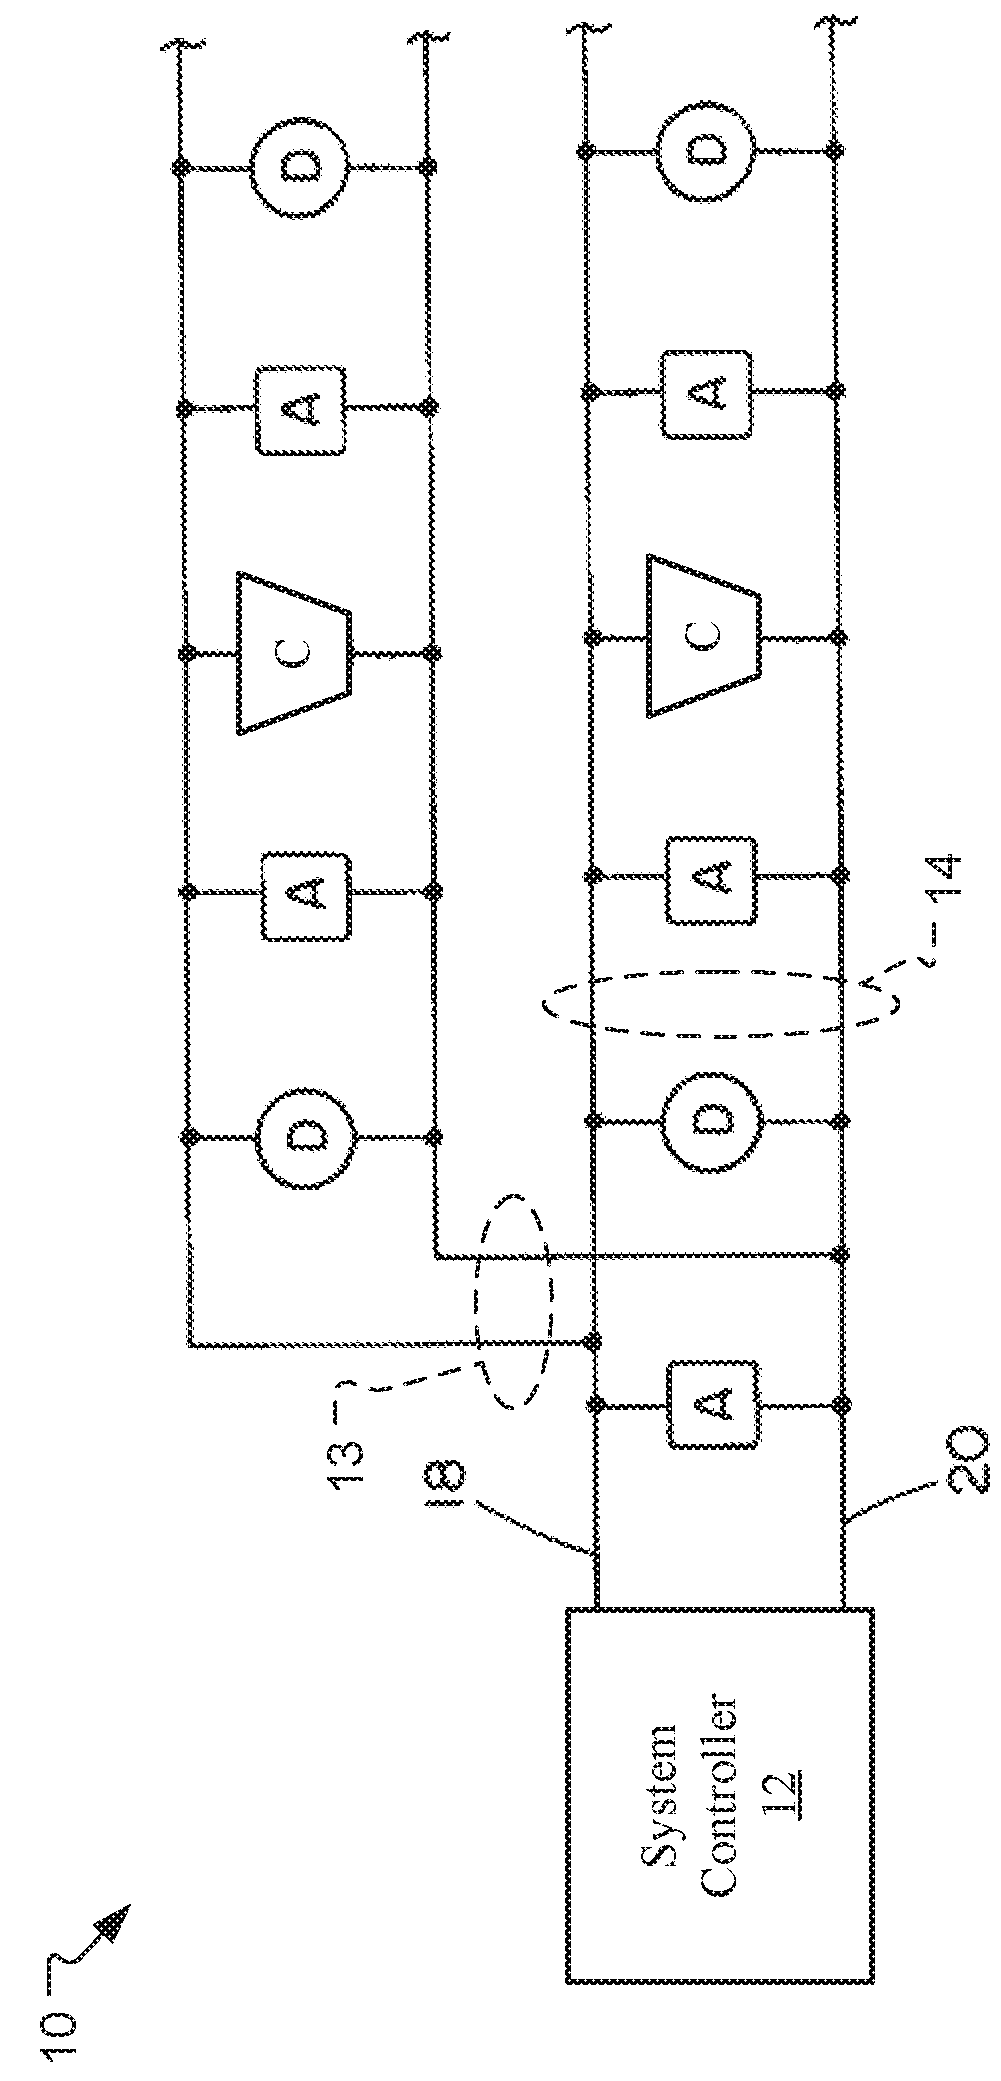 System and method for charging supplemental power units for alarm notification devices